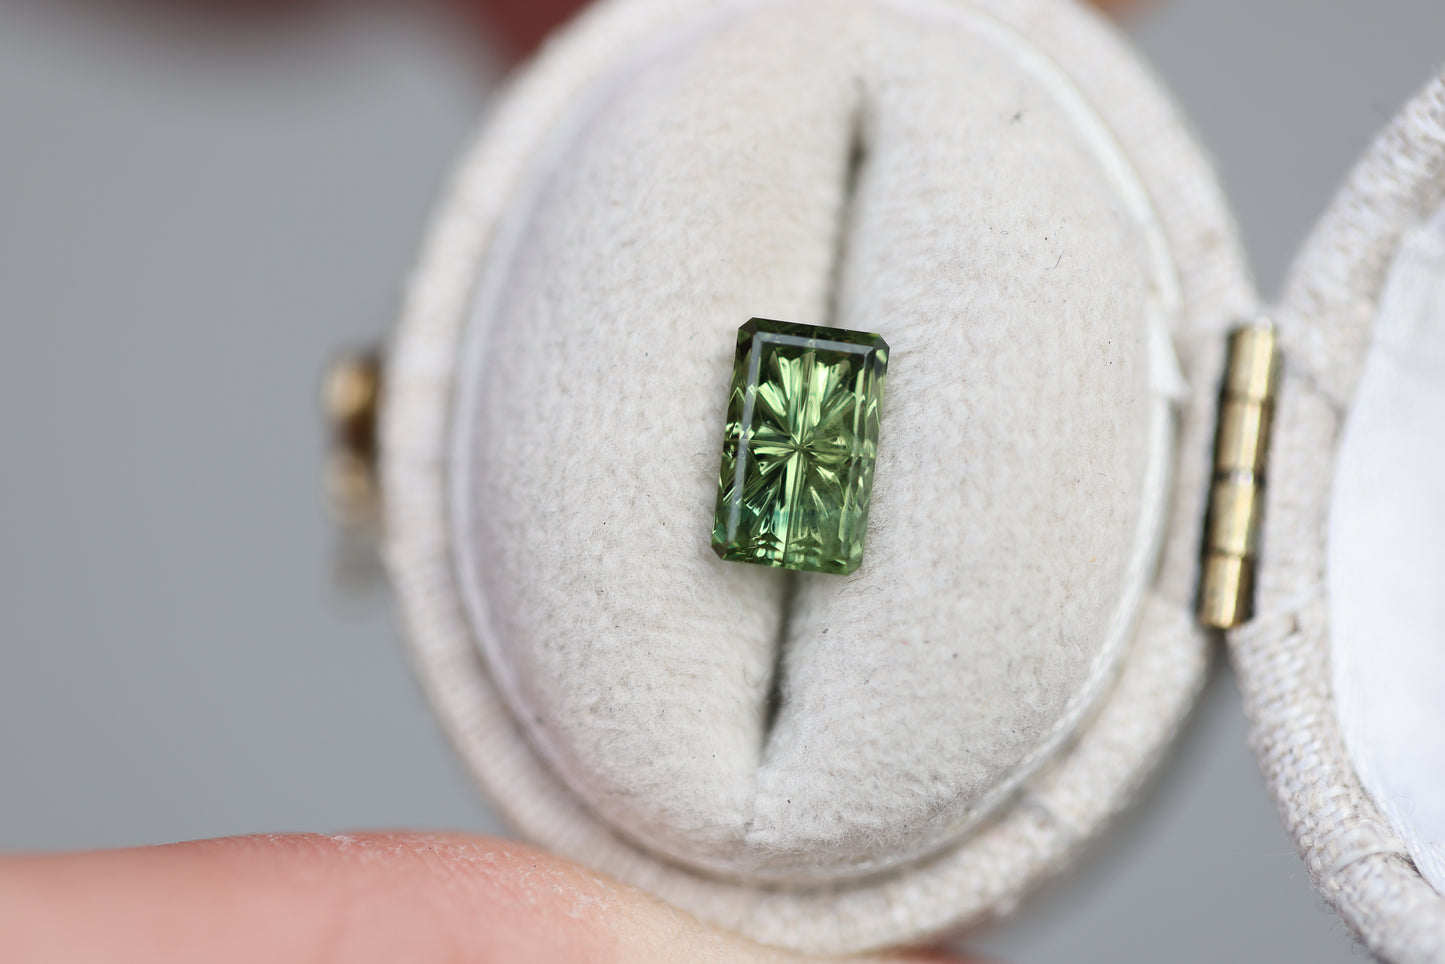 Load image into Gallery viewer, 1.28ct rectangle green sapphire - Starbrite cut by John Dyer
